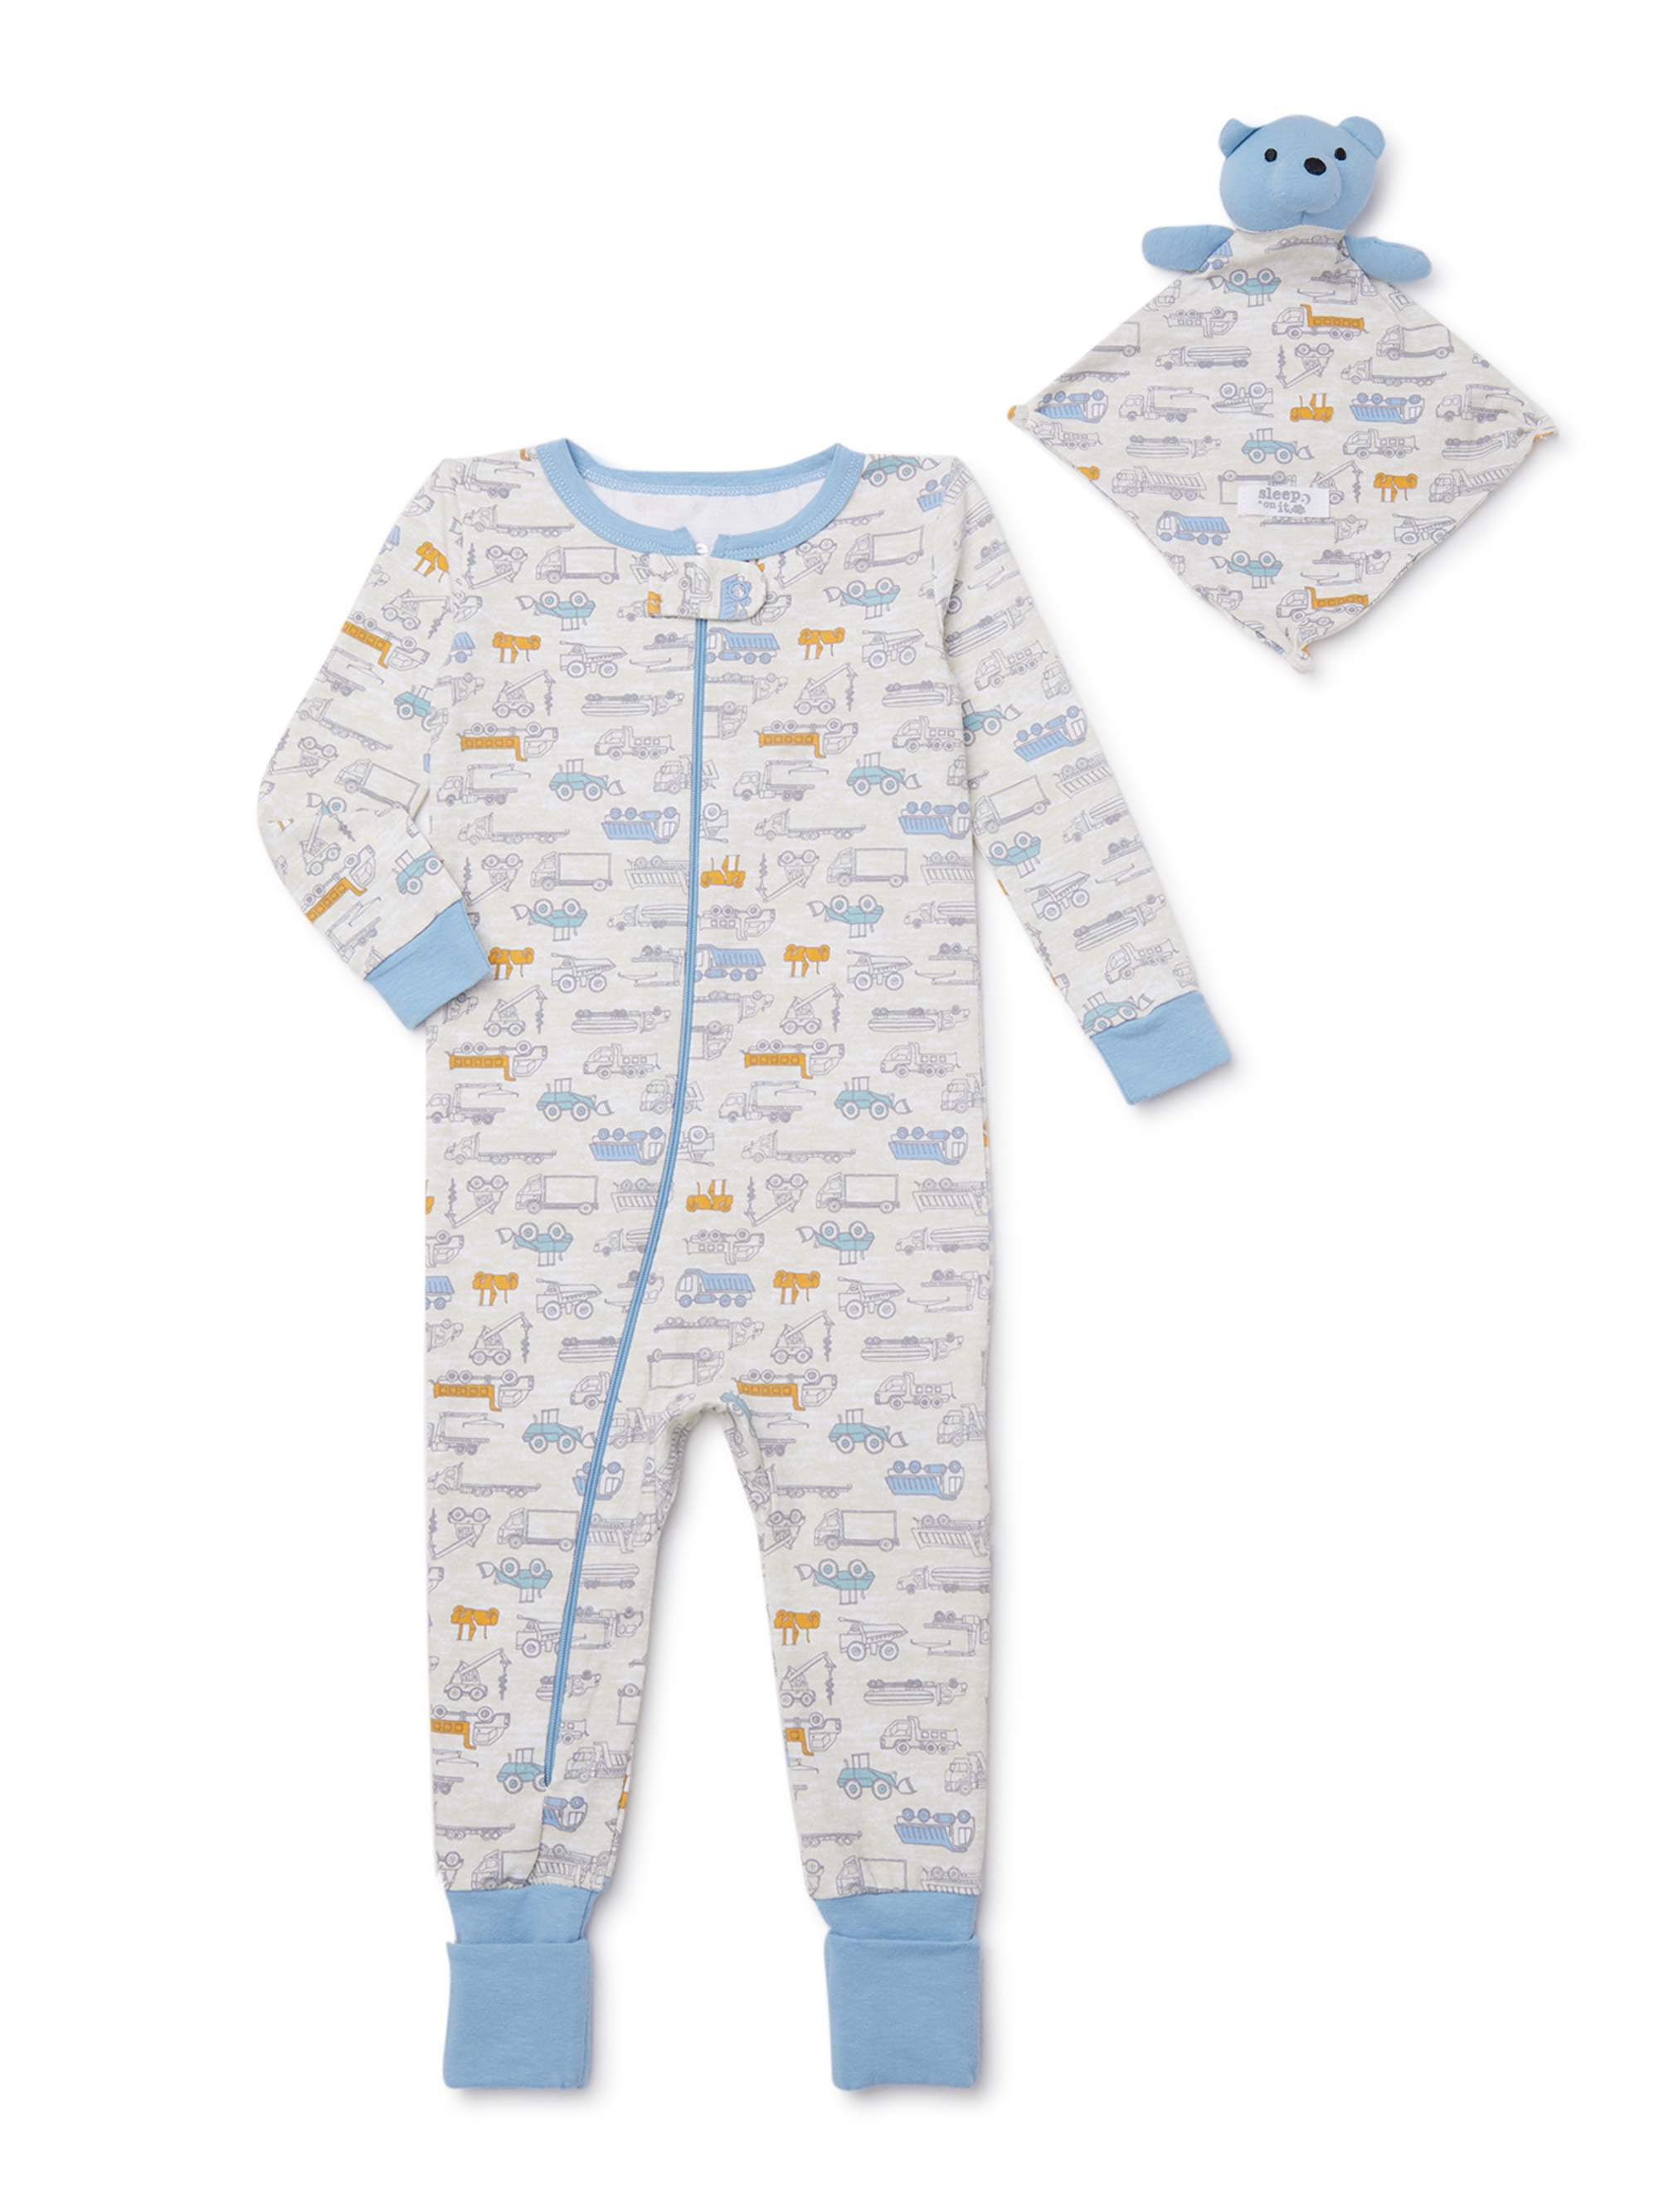 Baby Kids Sleep and Play Baby Cotton Sleeper Zip Front Footed Pajamas 0-12 Month